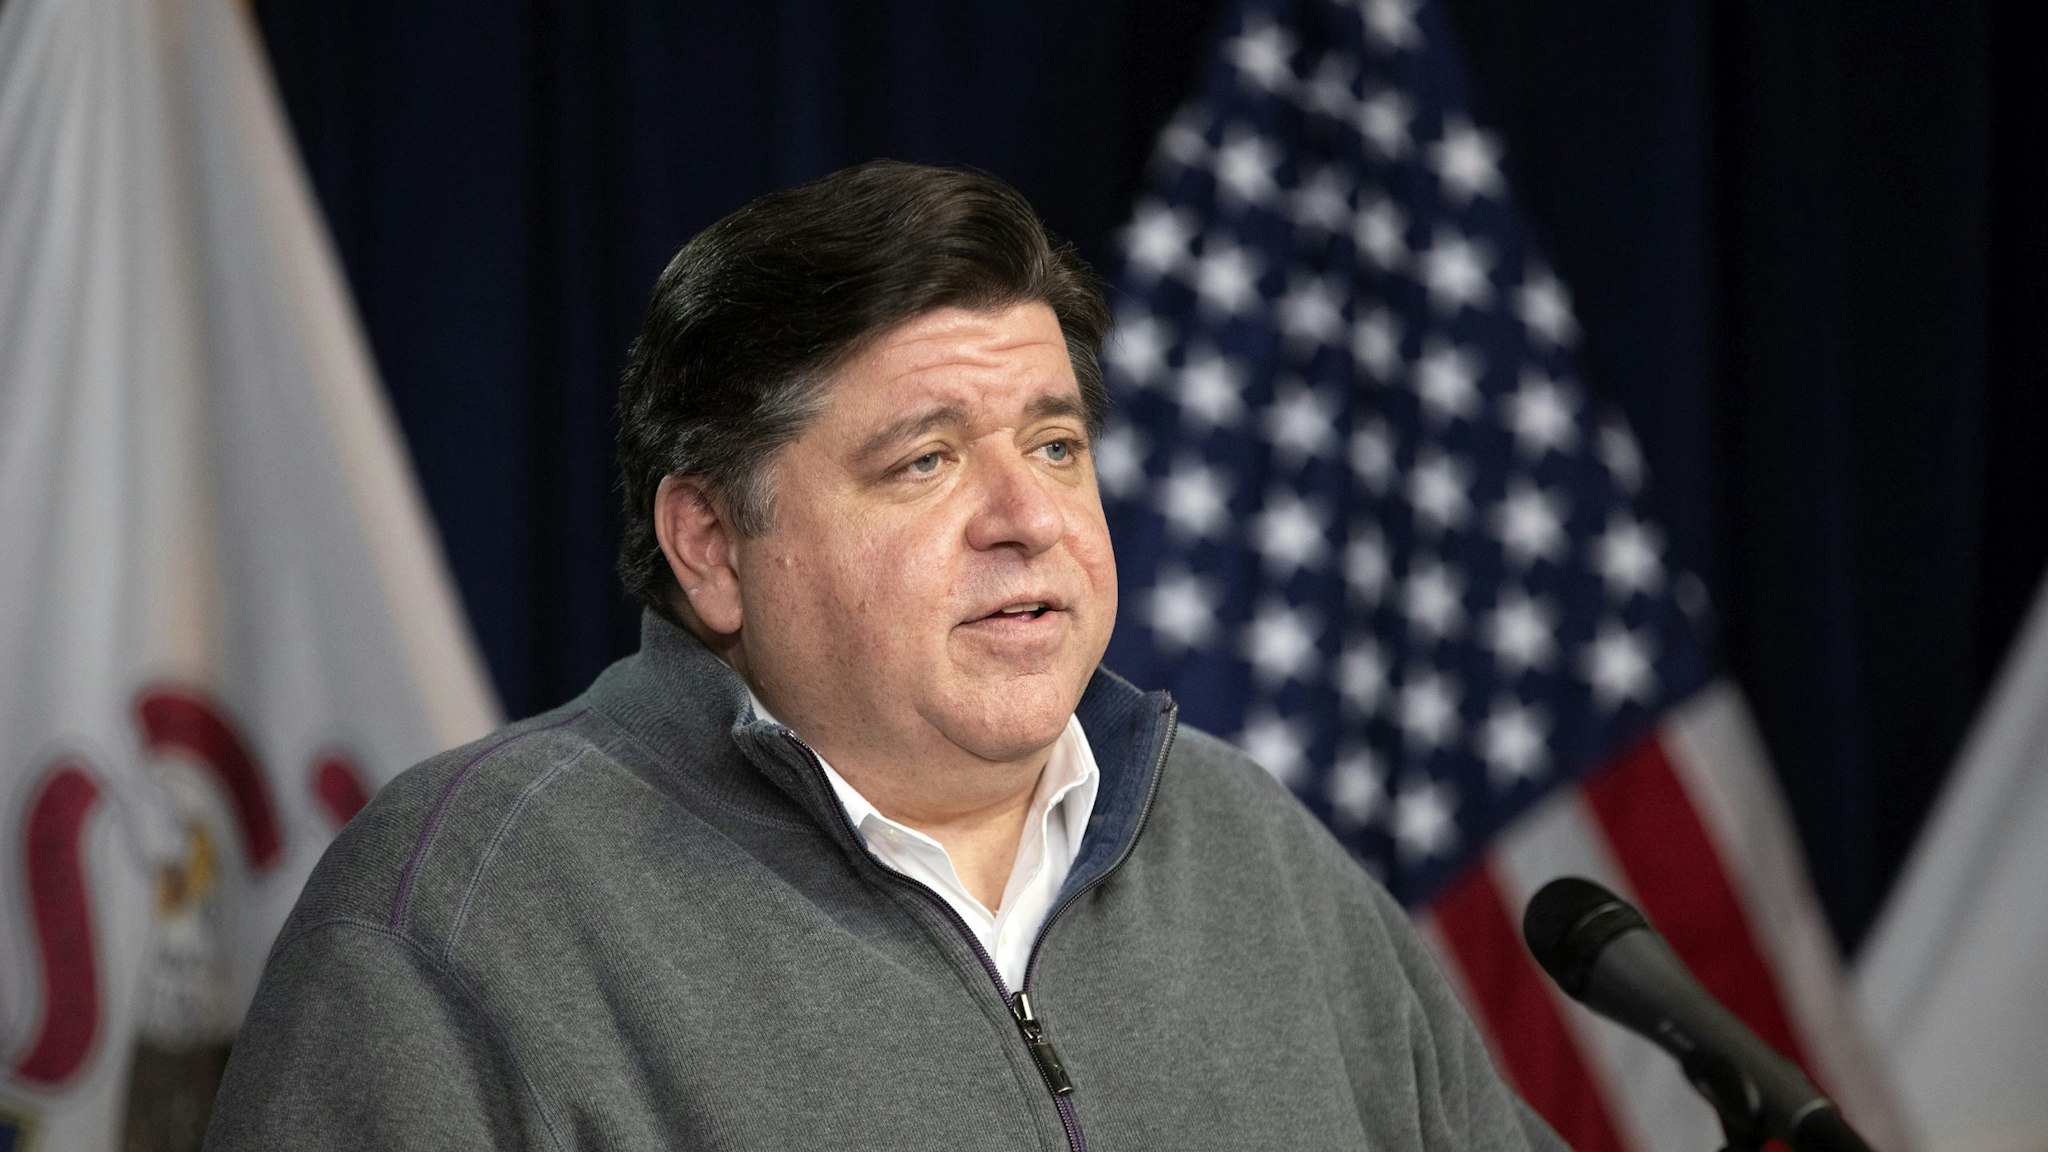 Illinois Gov. J.B. Pritzker speaks during the daily press briefing regarding the coronavirus pandemic Sunday, May 3, 2020, at the James R. Thompson Center in Chicago. (Erin Hooley/Chicago Tribune/Tribune News Service via Getty Images)